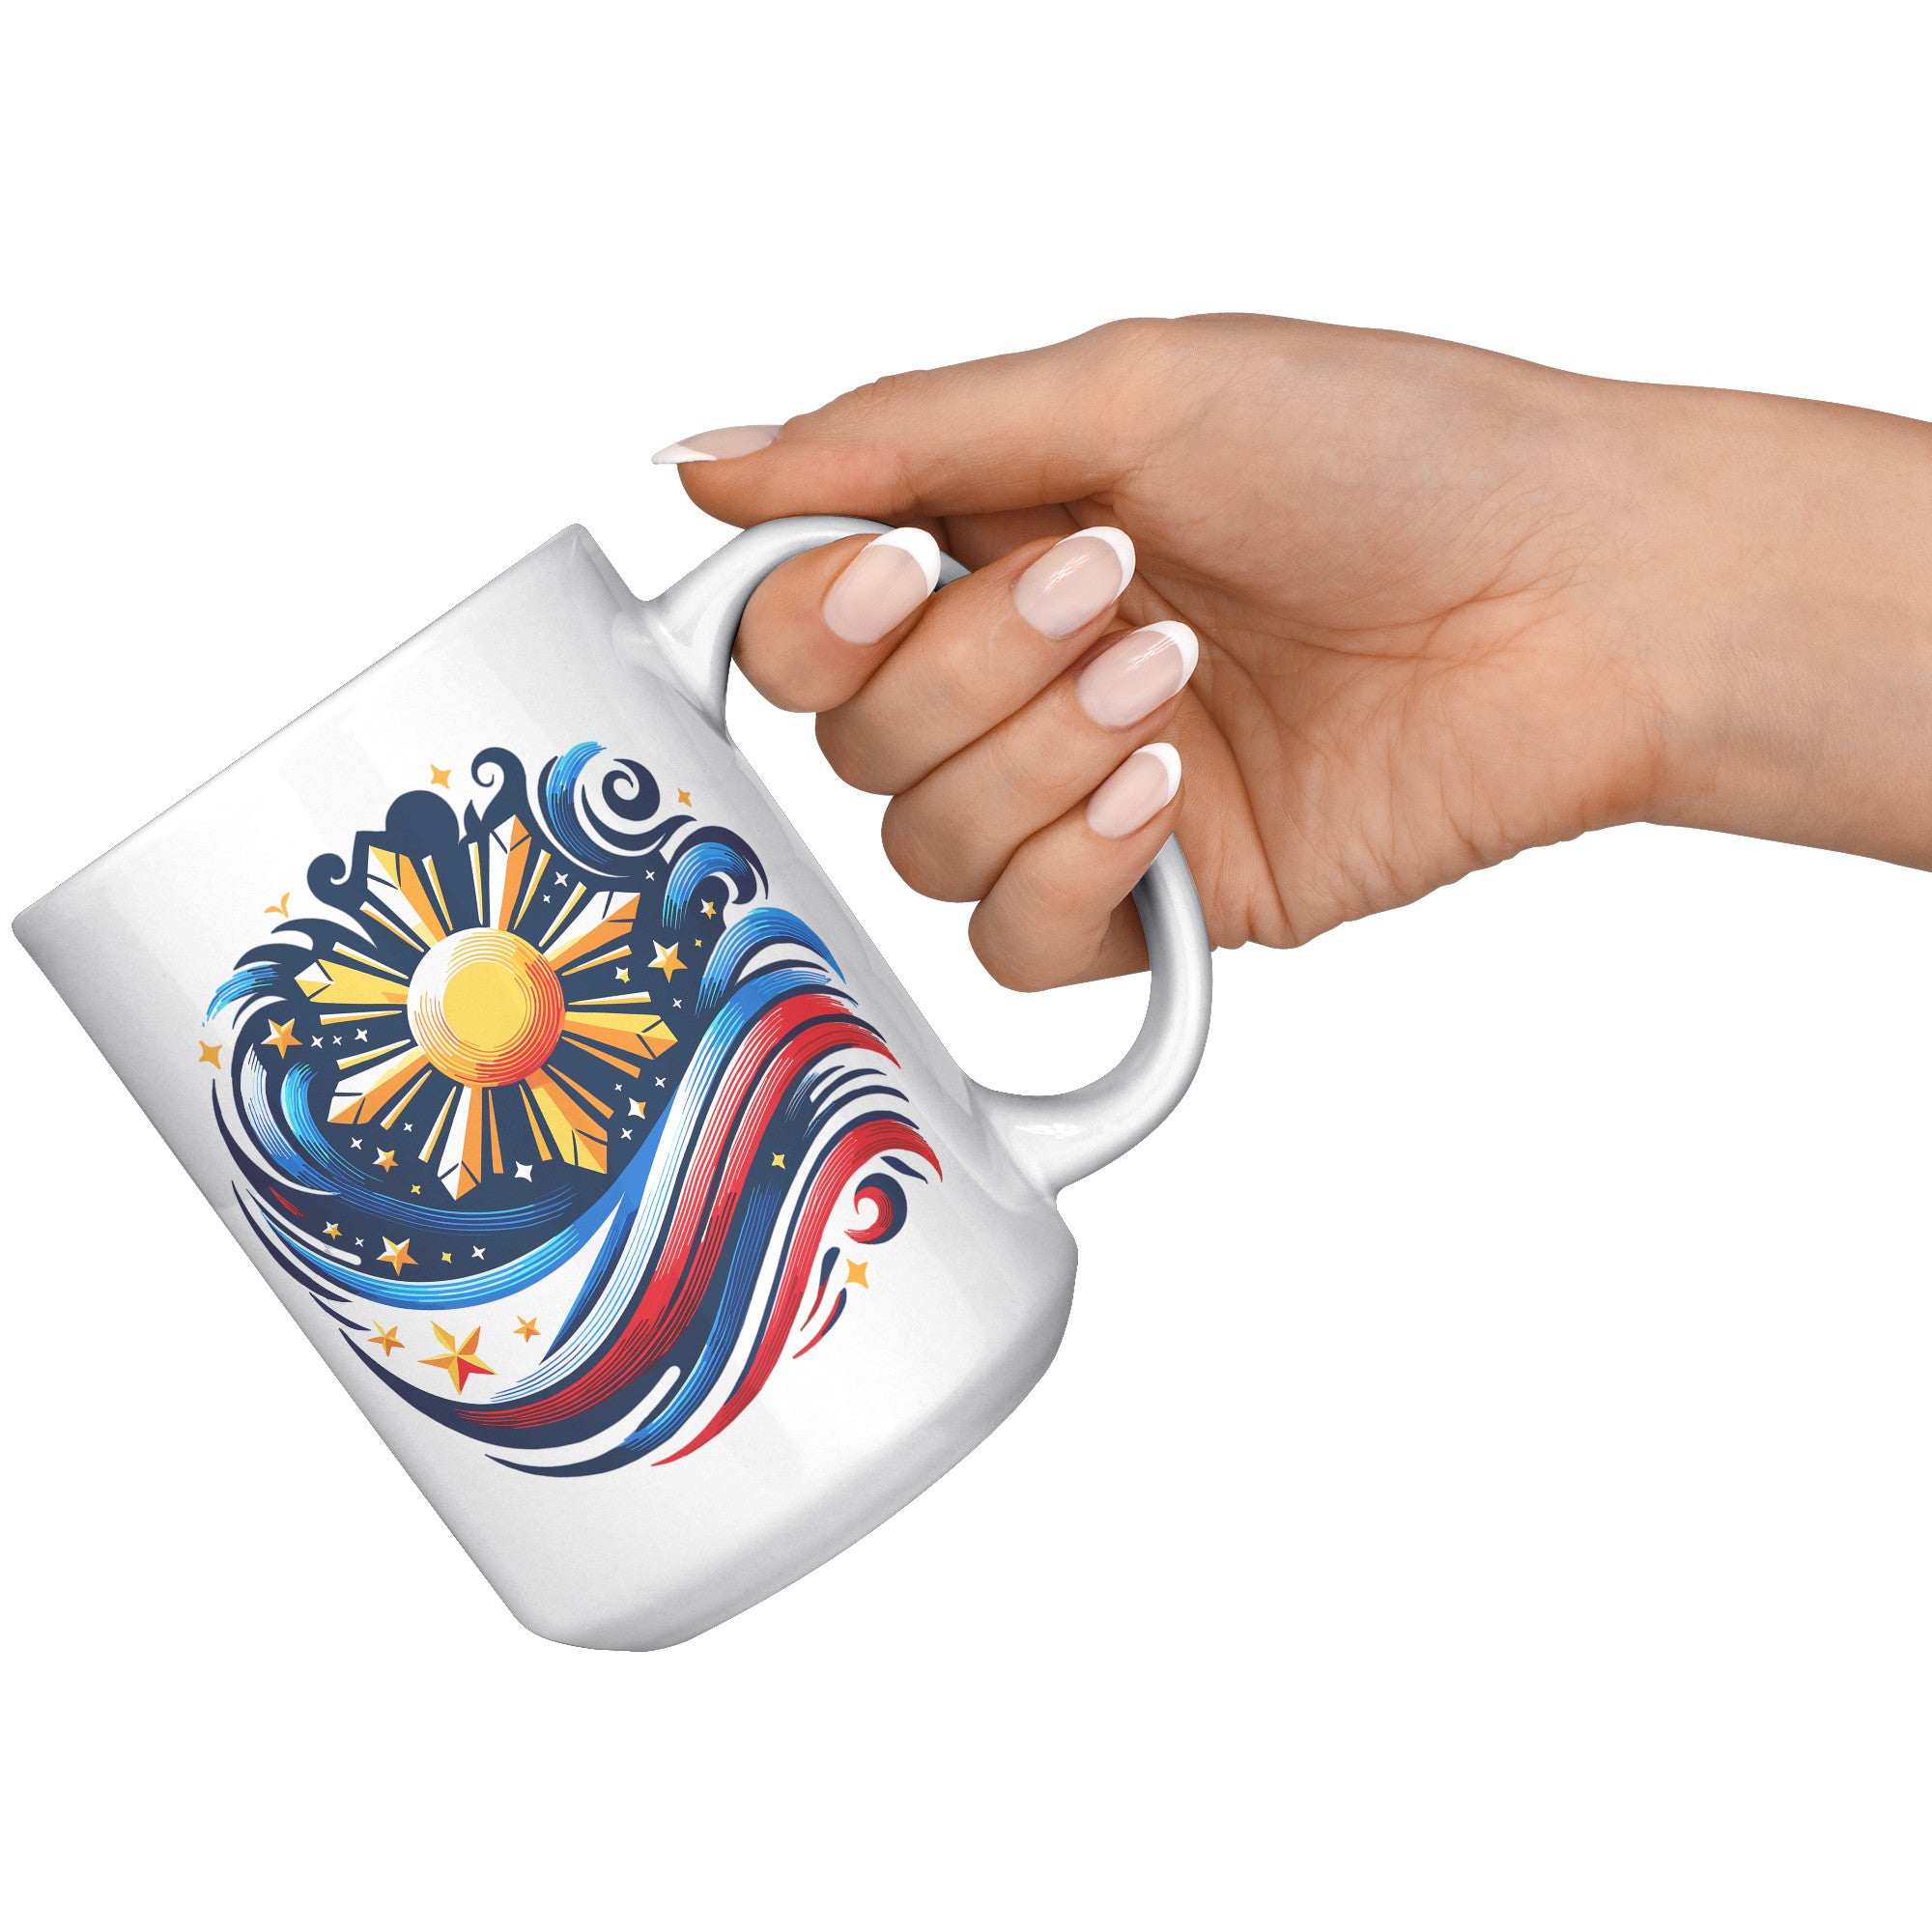 Proudly Pinoy Coffee Mug - Vibrant Filipino Flag Design - Patriotic Gift for Filipinos - Celebrate Heritage with Every Sip!" - E1